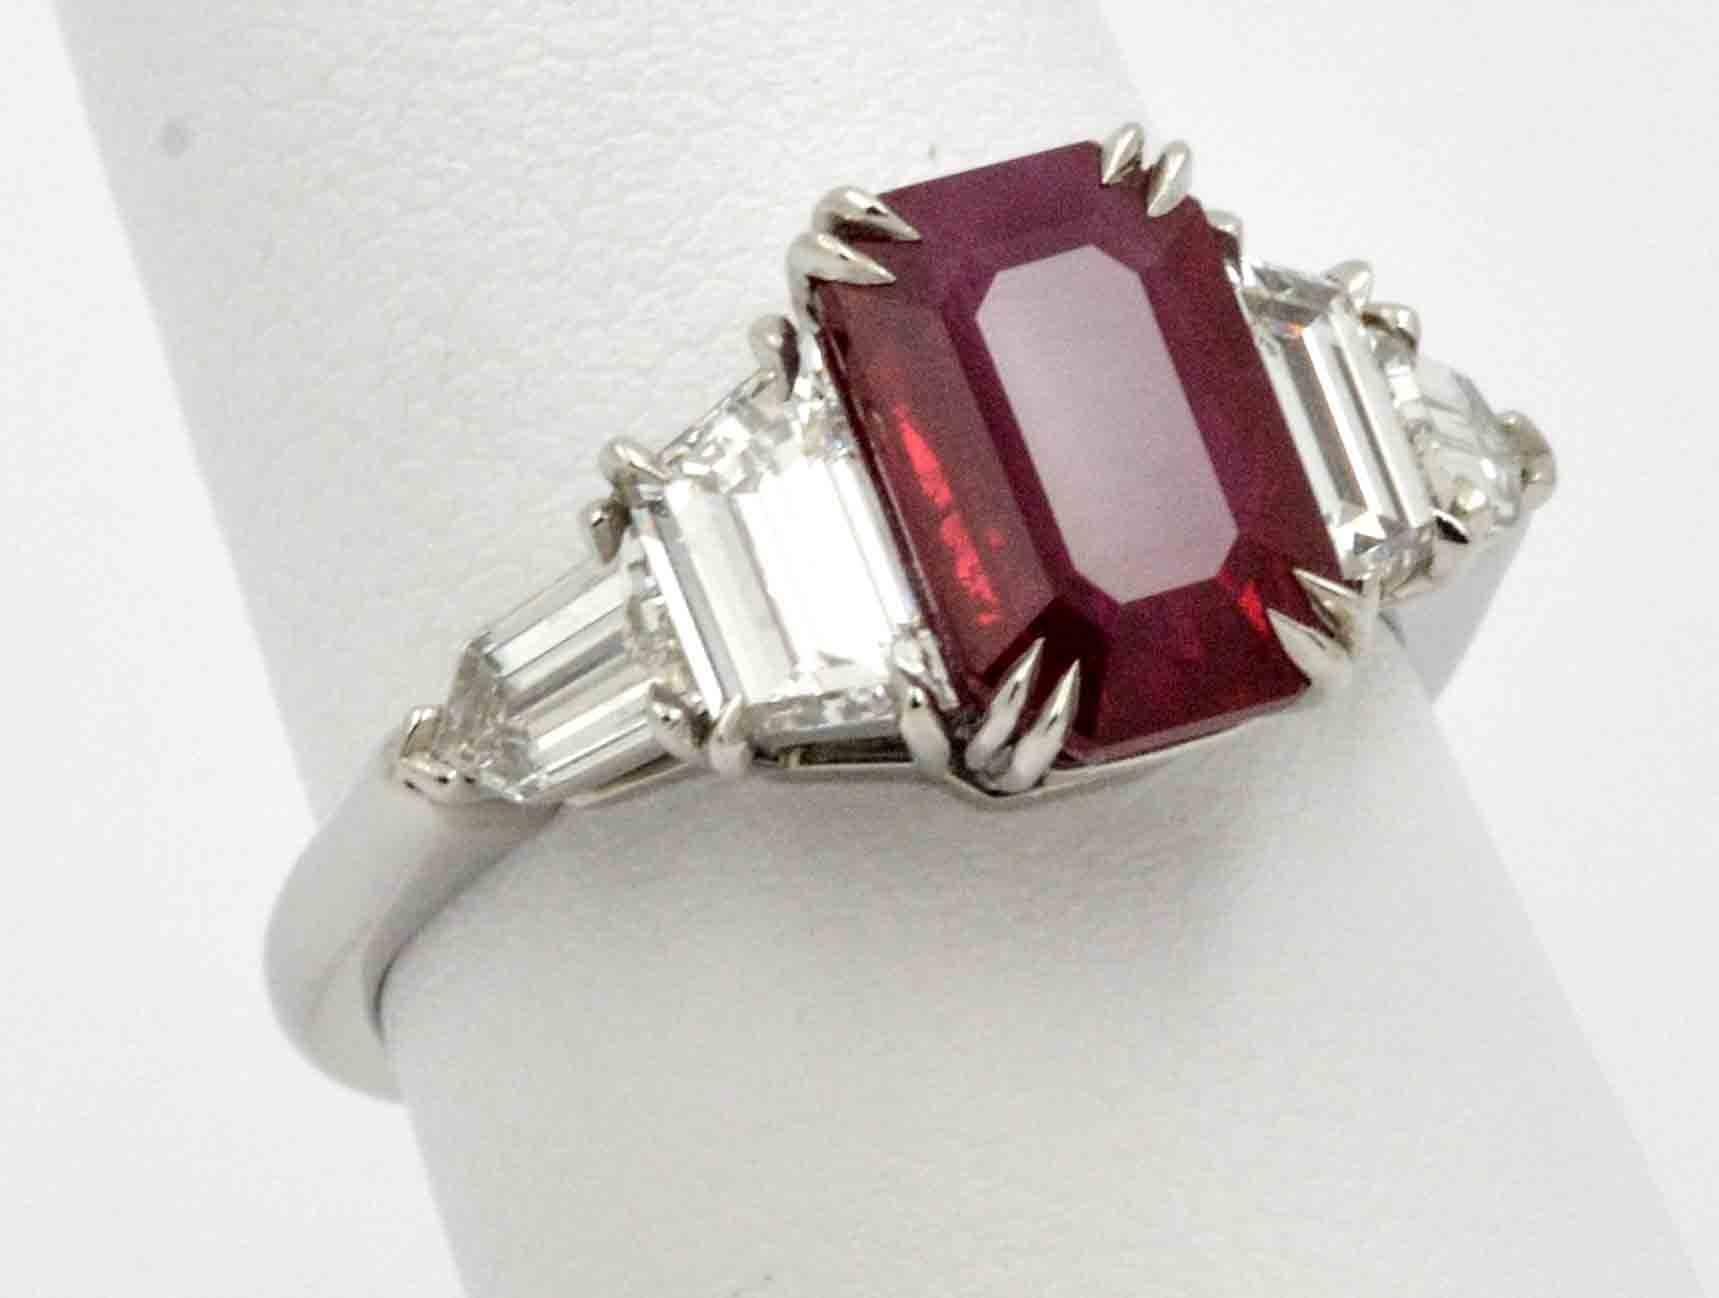 Cool sophistication and a touch of color in this stylish custom vivid red 3.01 carat emerald cut Burmese Ruby platinum engagement ring. Accenting this elegant ruby are two matched trapezoid cut diamonds that have a combined weight of 0.84 carats (E